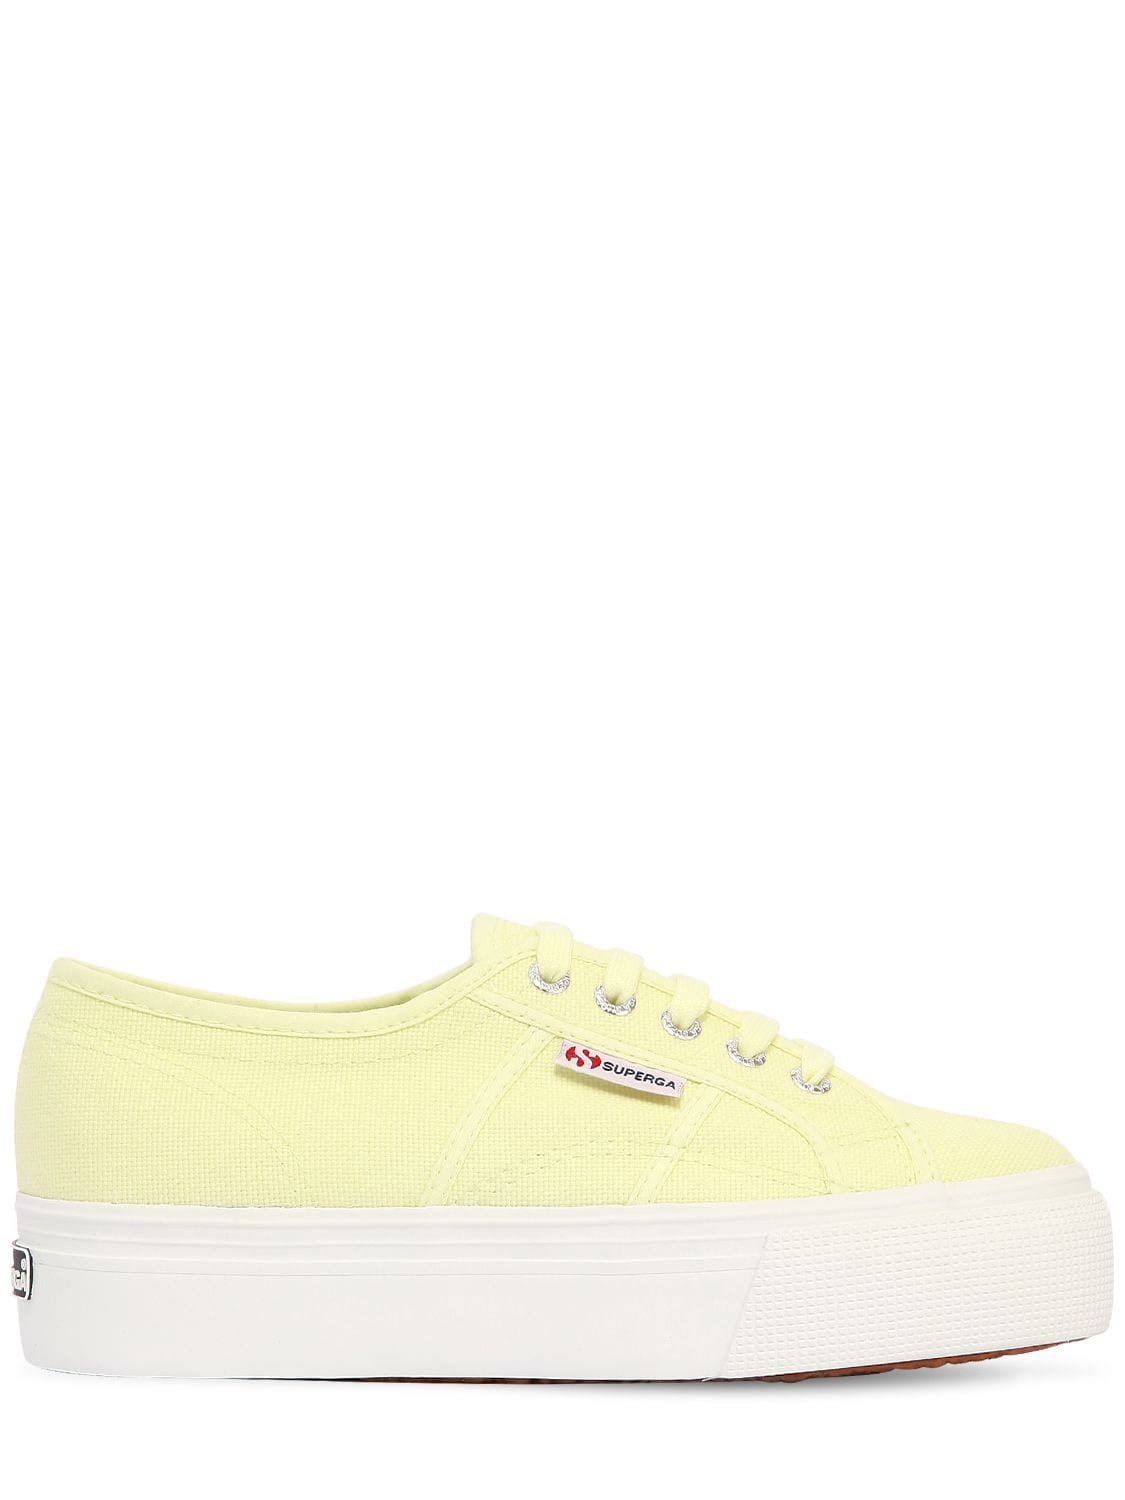 Superga 2750 Canvas Sneakers In Yellow 